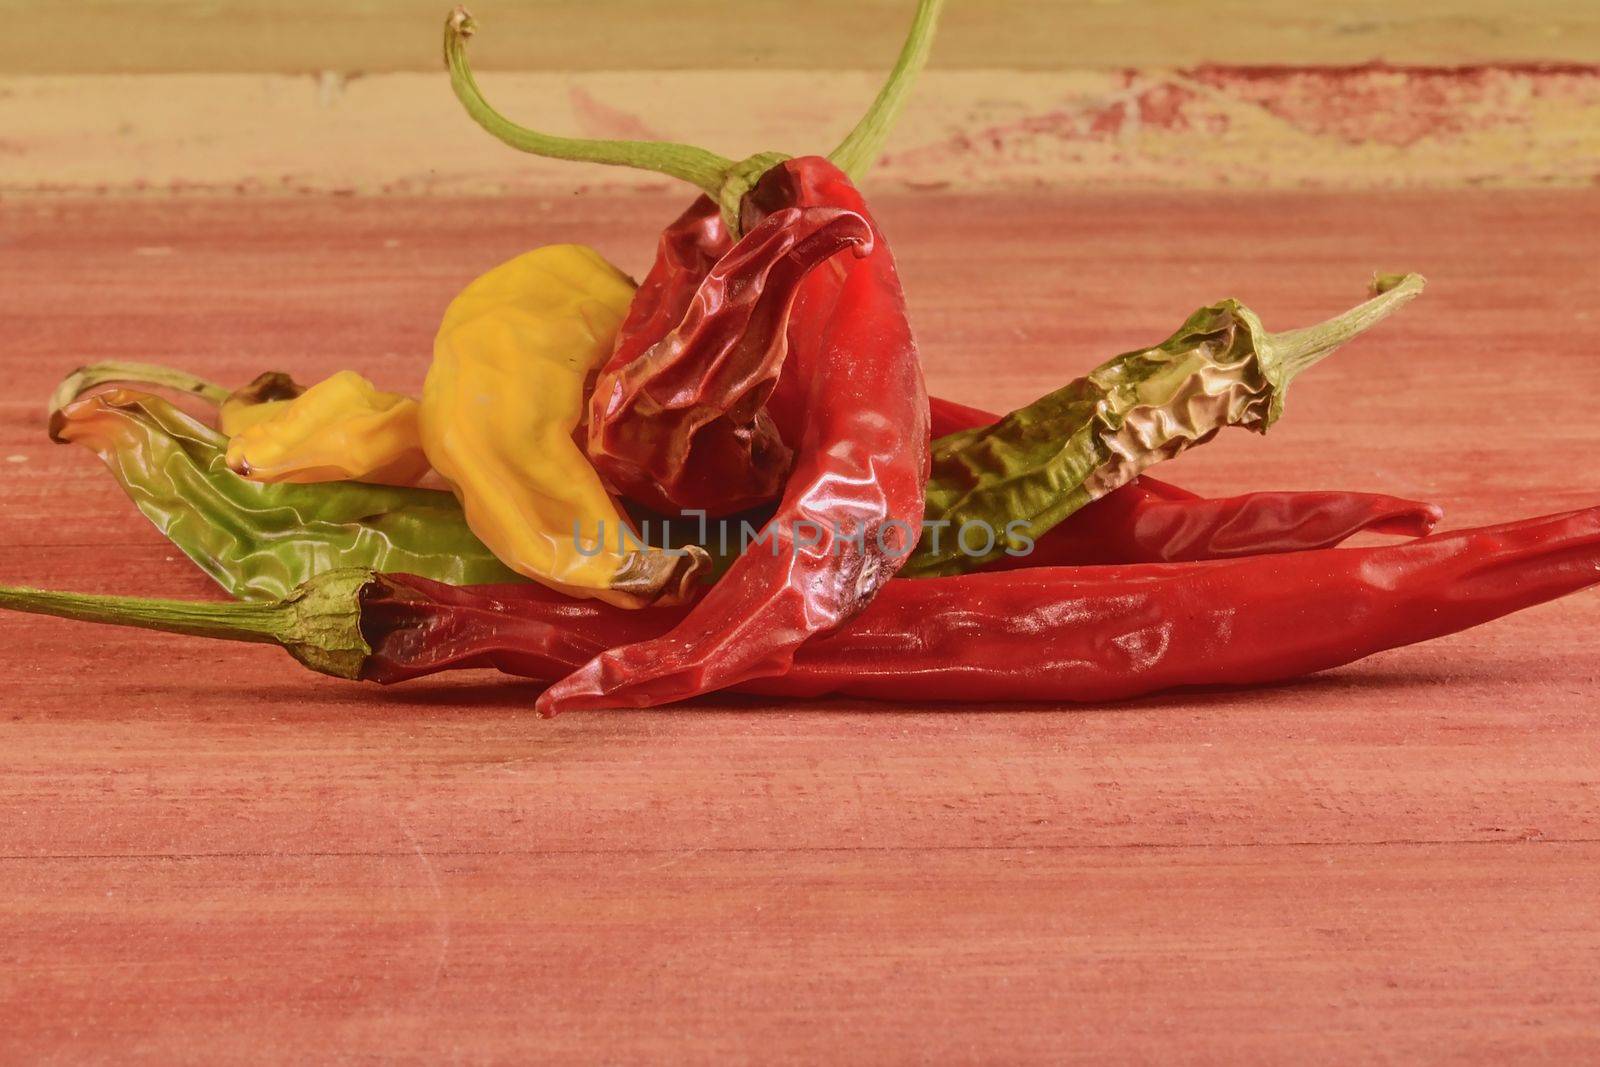 Shrinking and mould chili peppers on red wooden background. Rotten chili peppers by roman_nerud